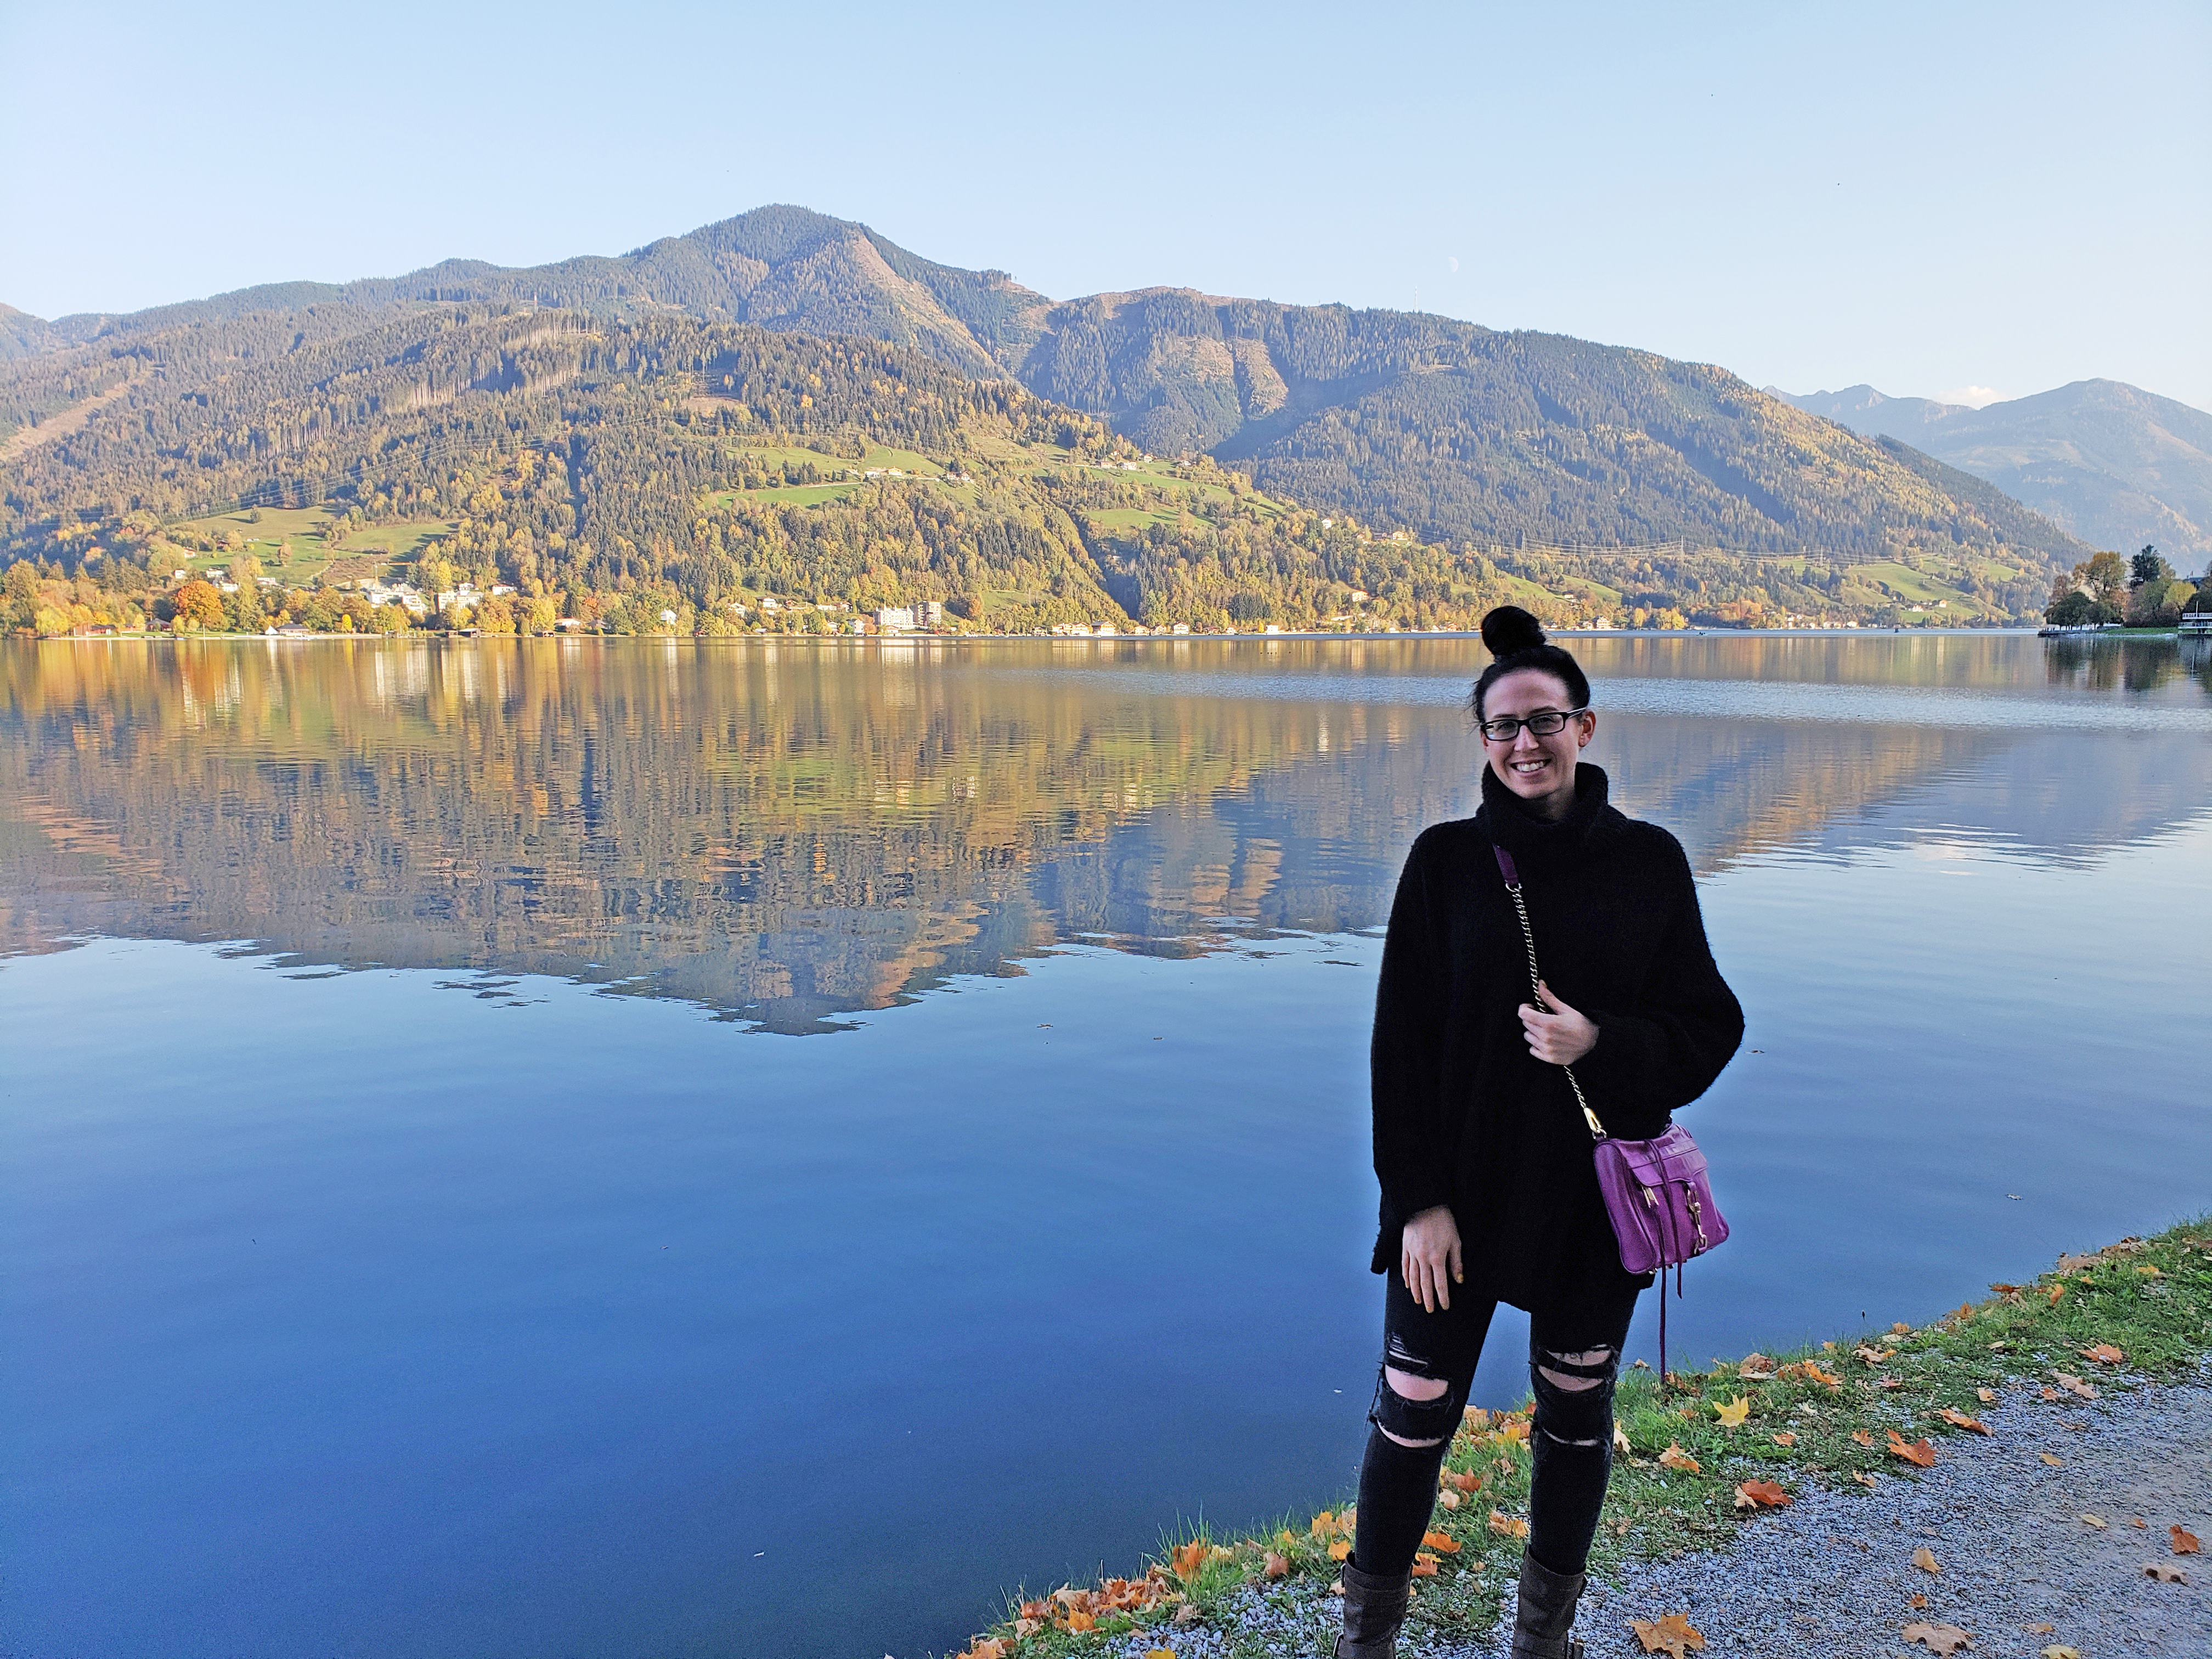 A_Quick_Guide_to_Zell_am_See_Austria